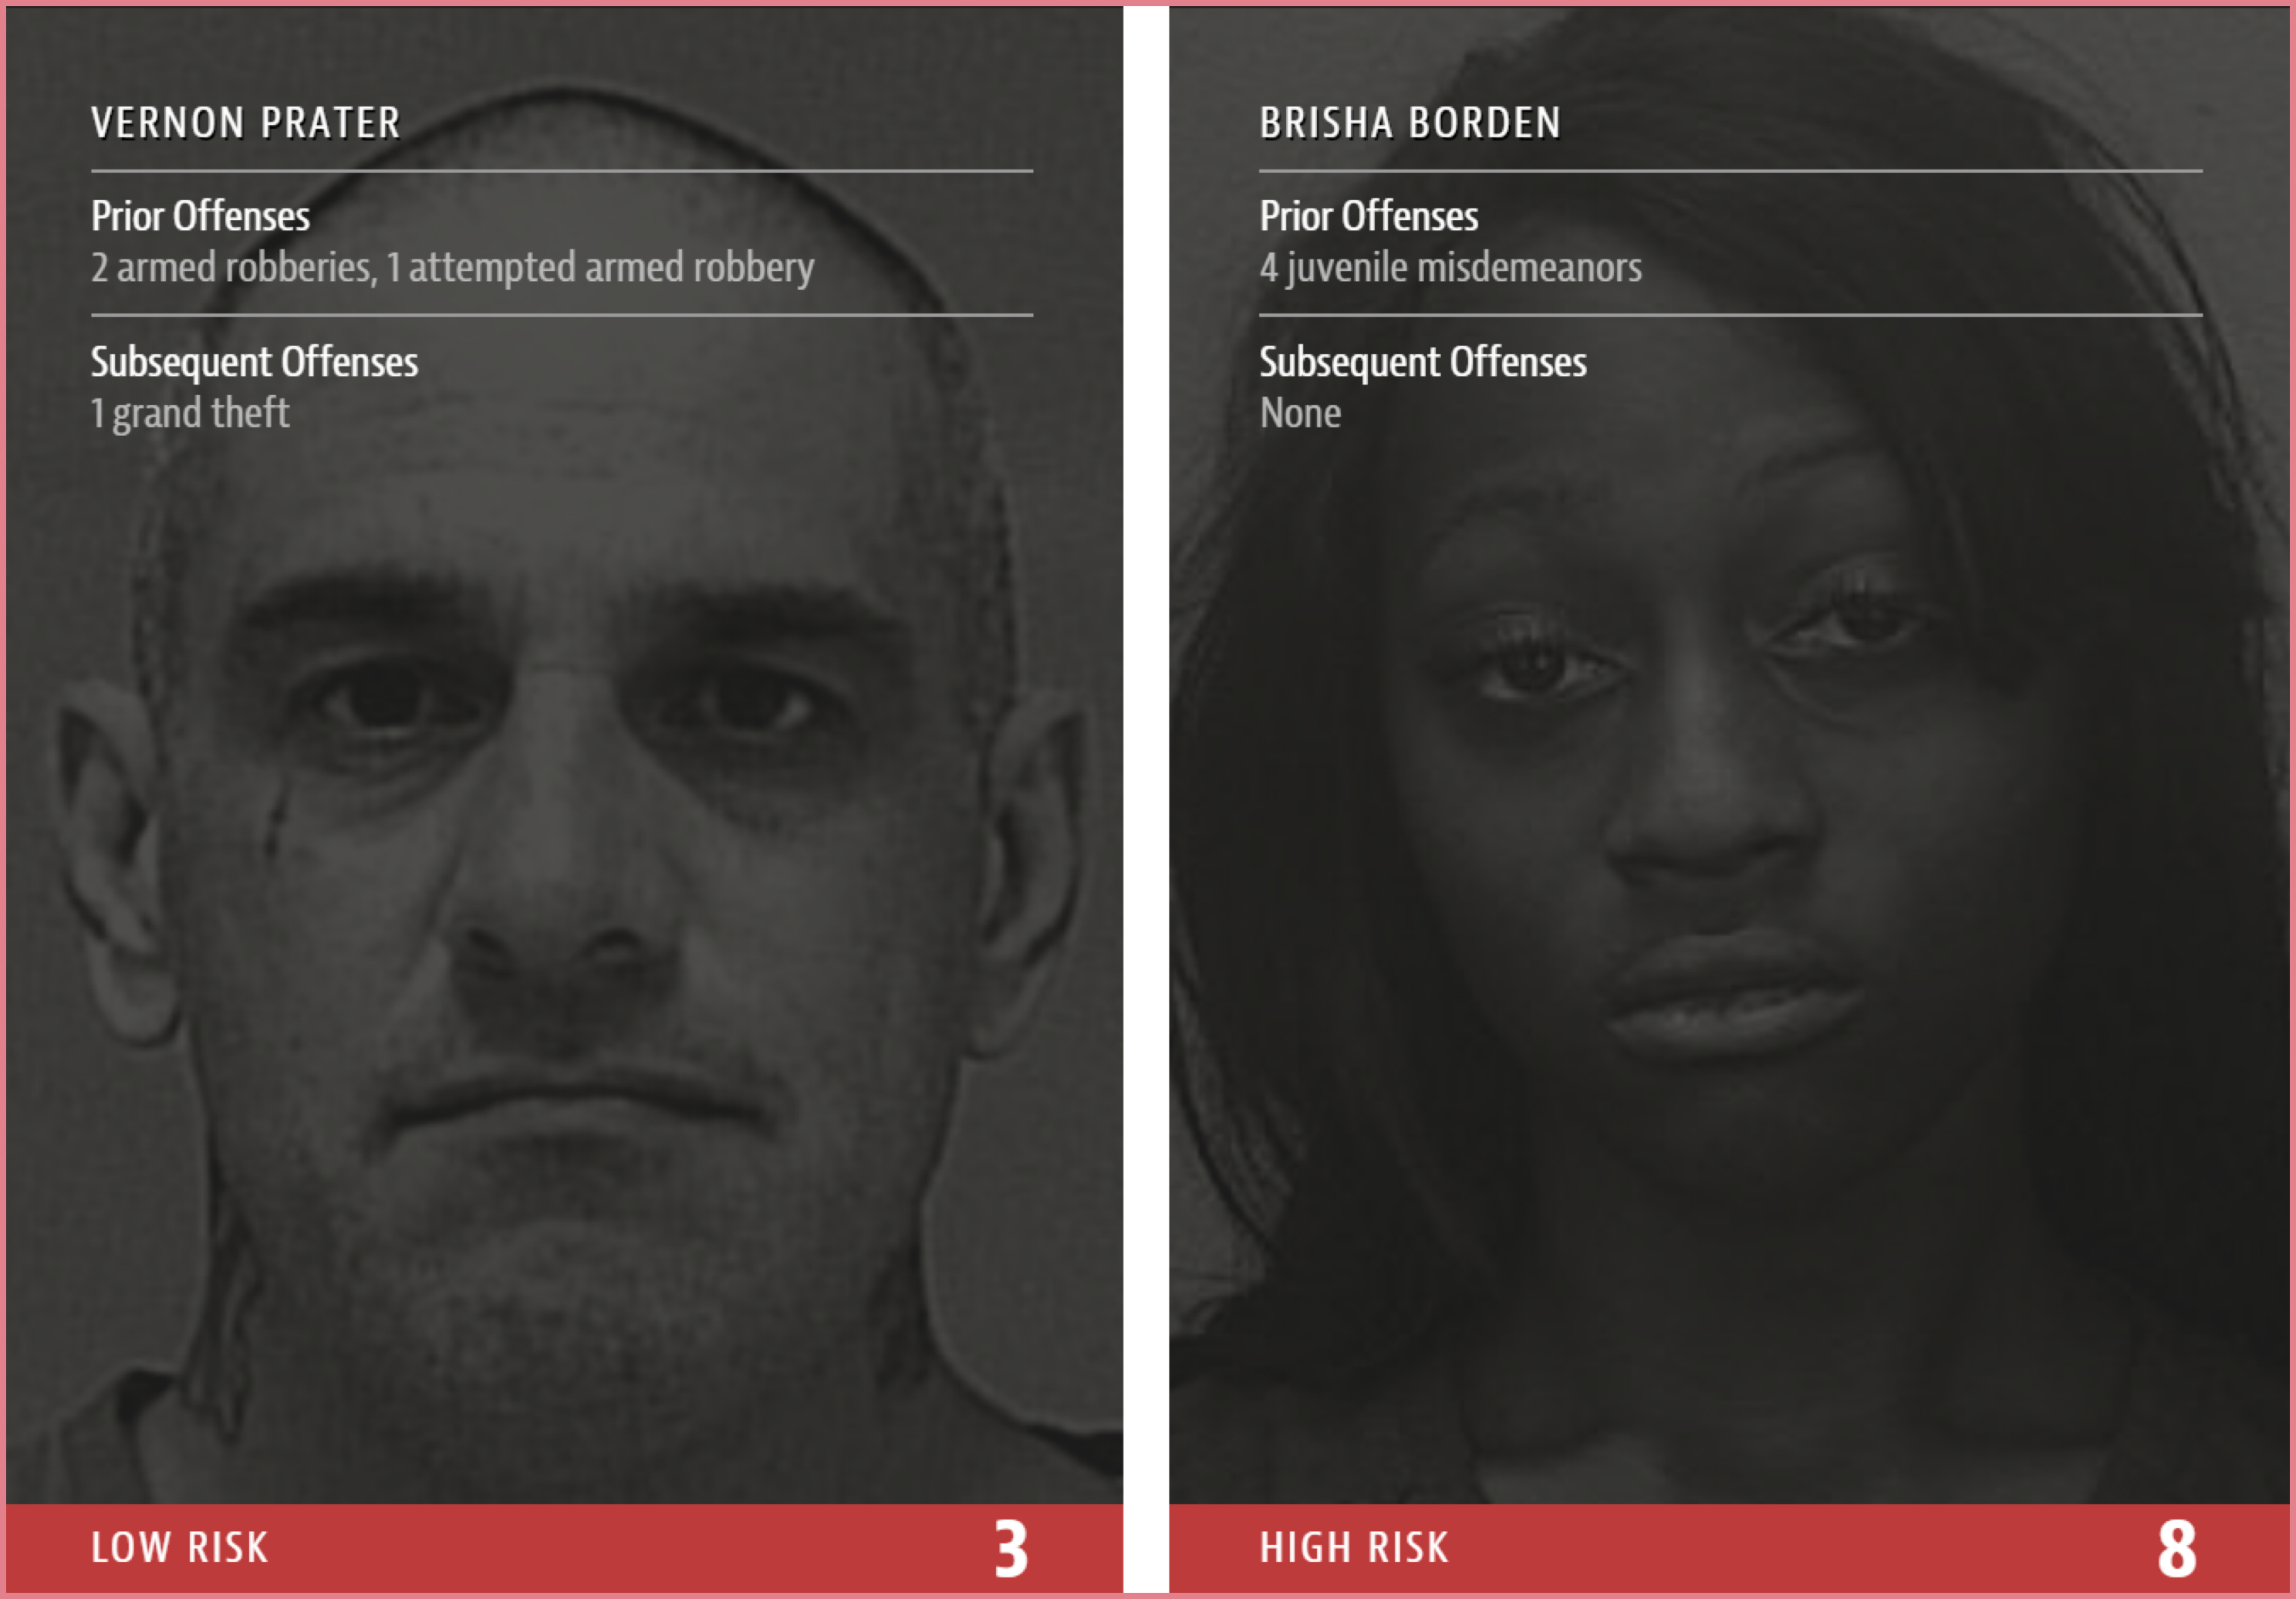 Left side image shows a white male who has done armed robberies being classified as low risk, whereas on the right, a darker female who has just done juvenile misdemeanors is classified as high risk.